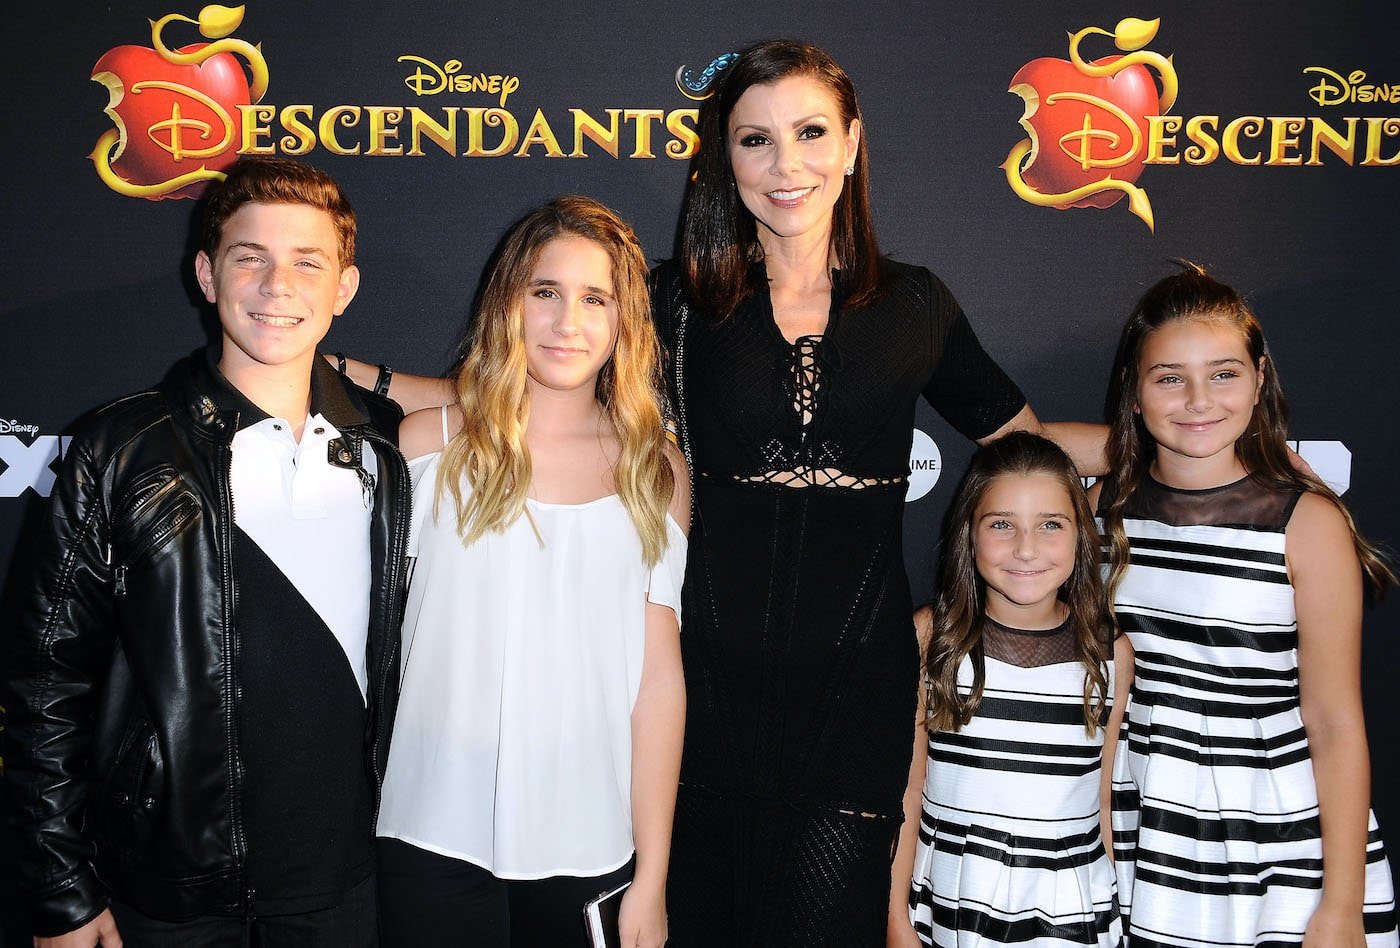 Heather Dubrow and her children attended a red carpet event